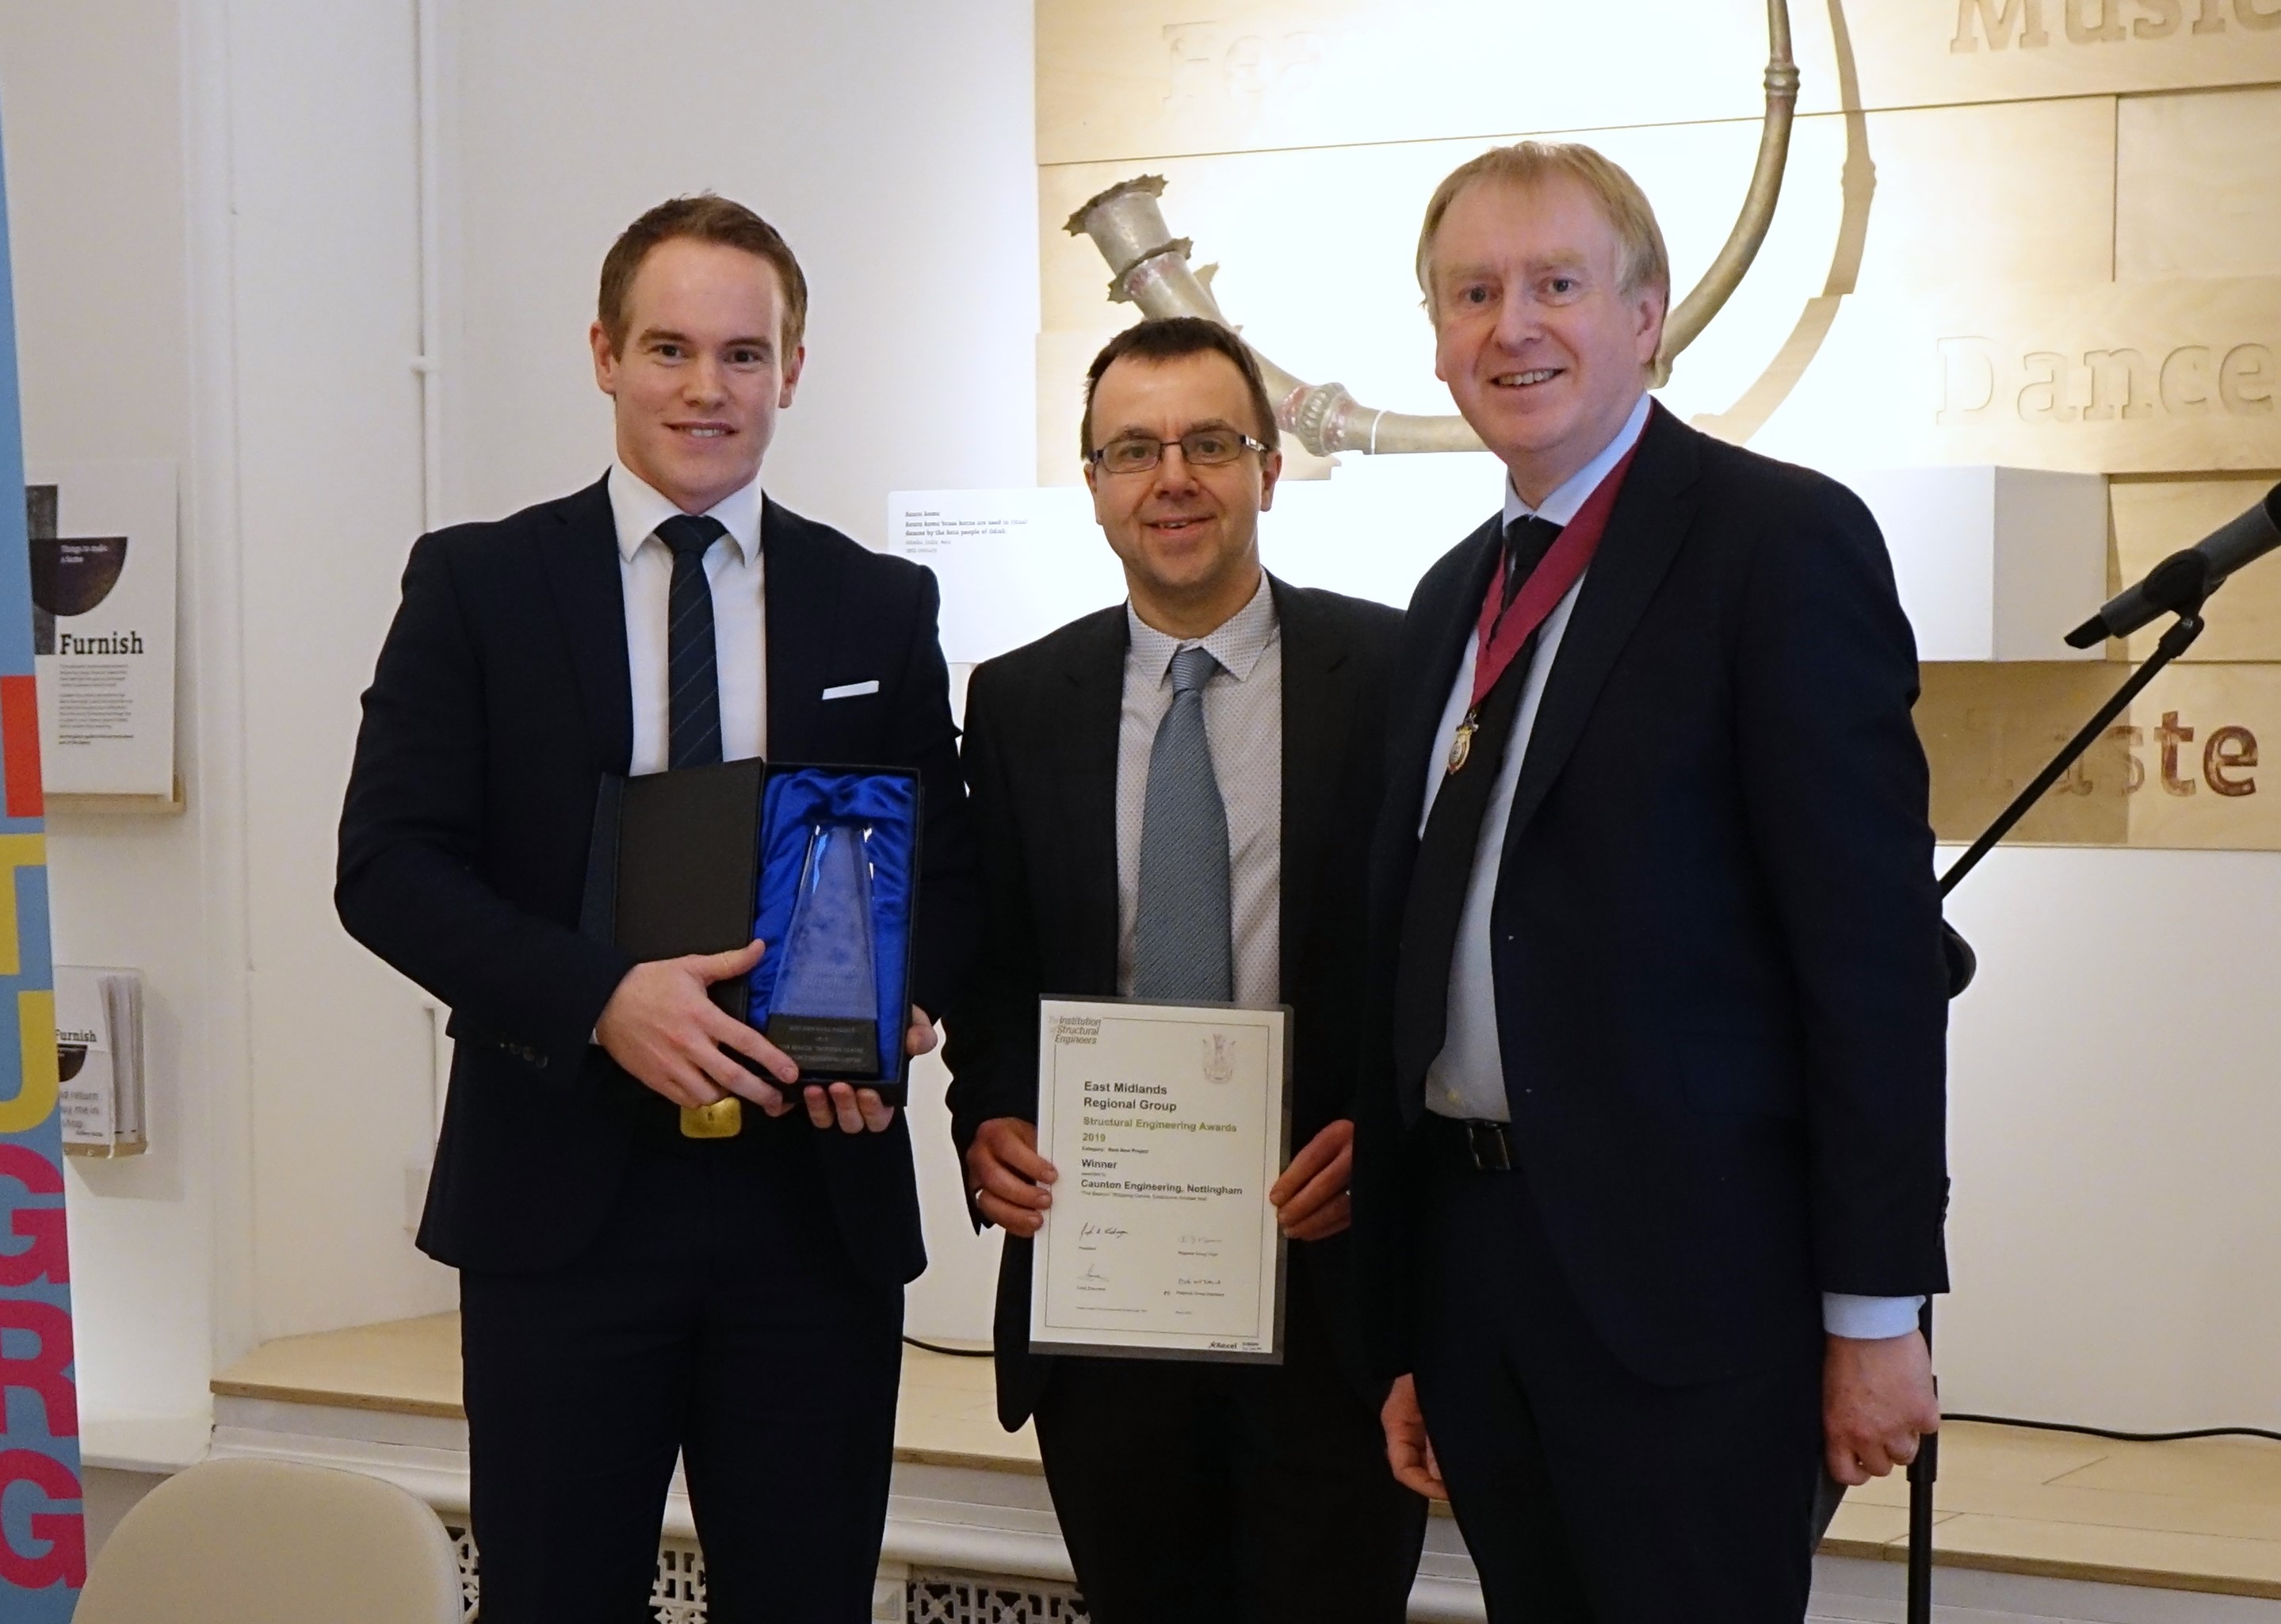 ISE Structural Engineering Awards Winner 2019